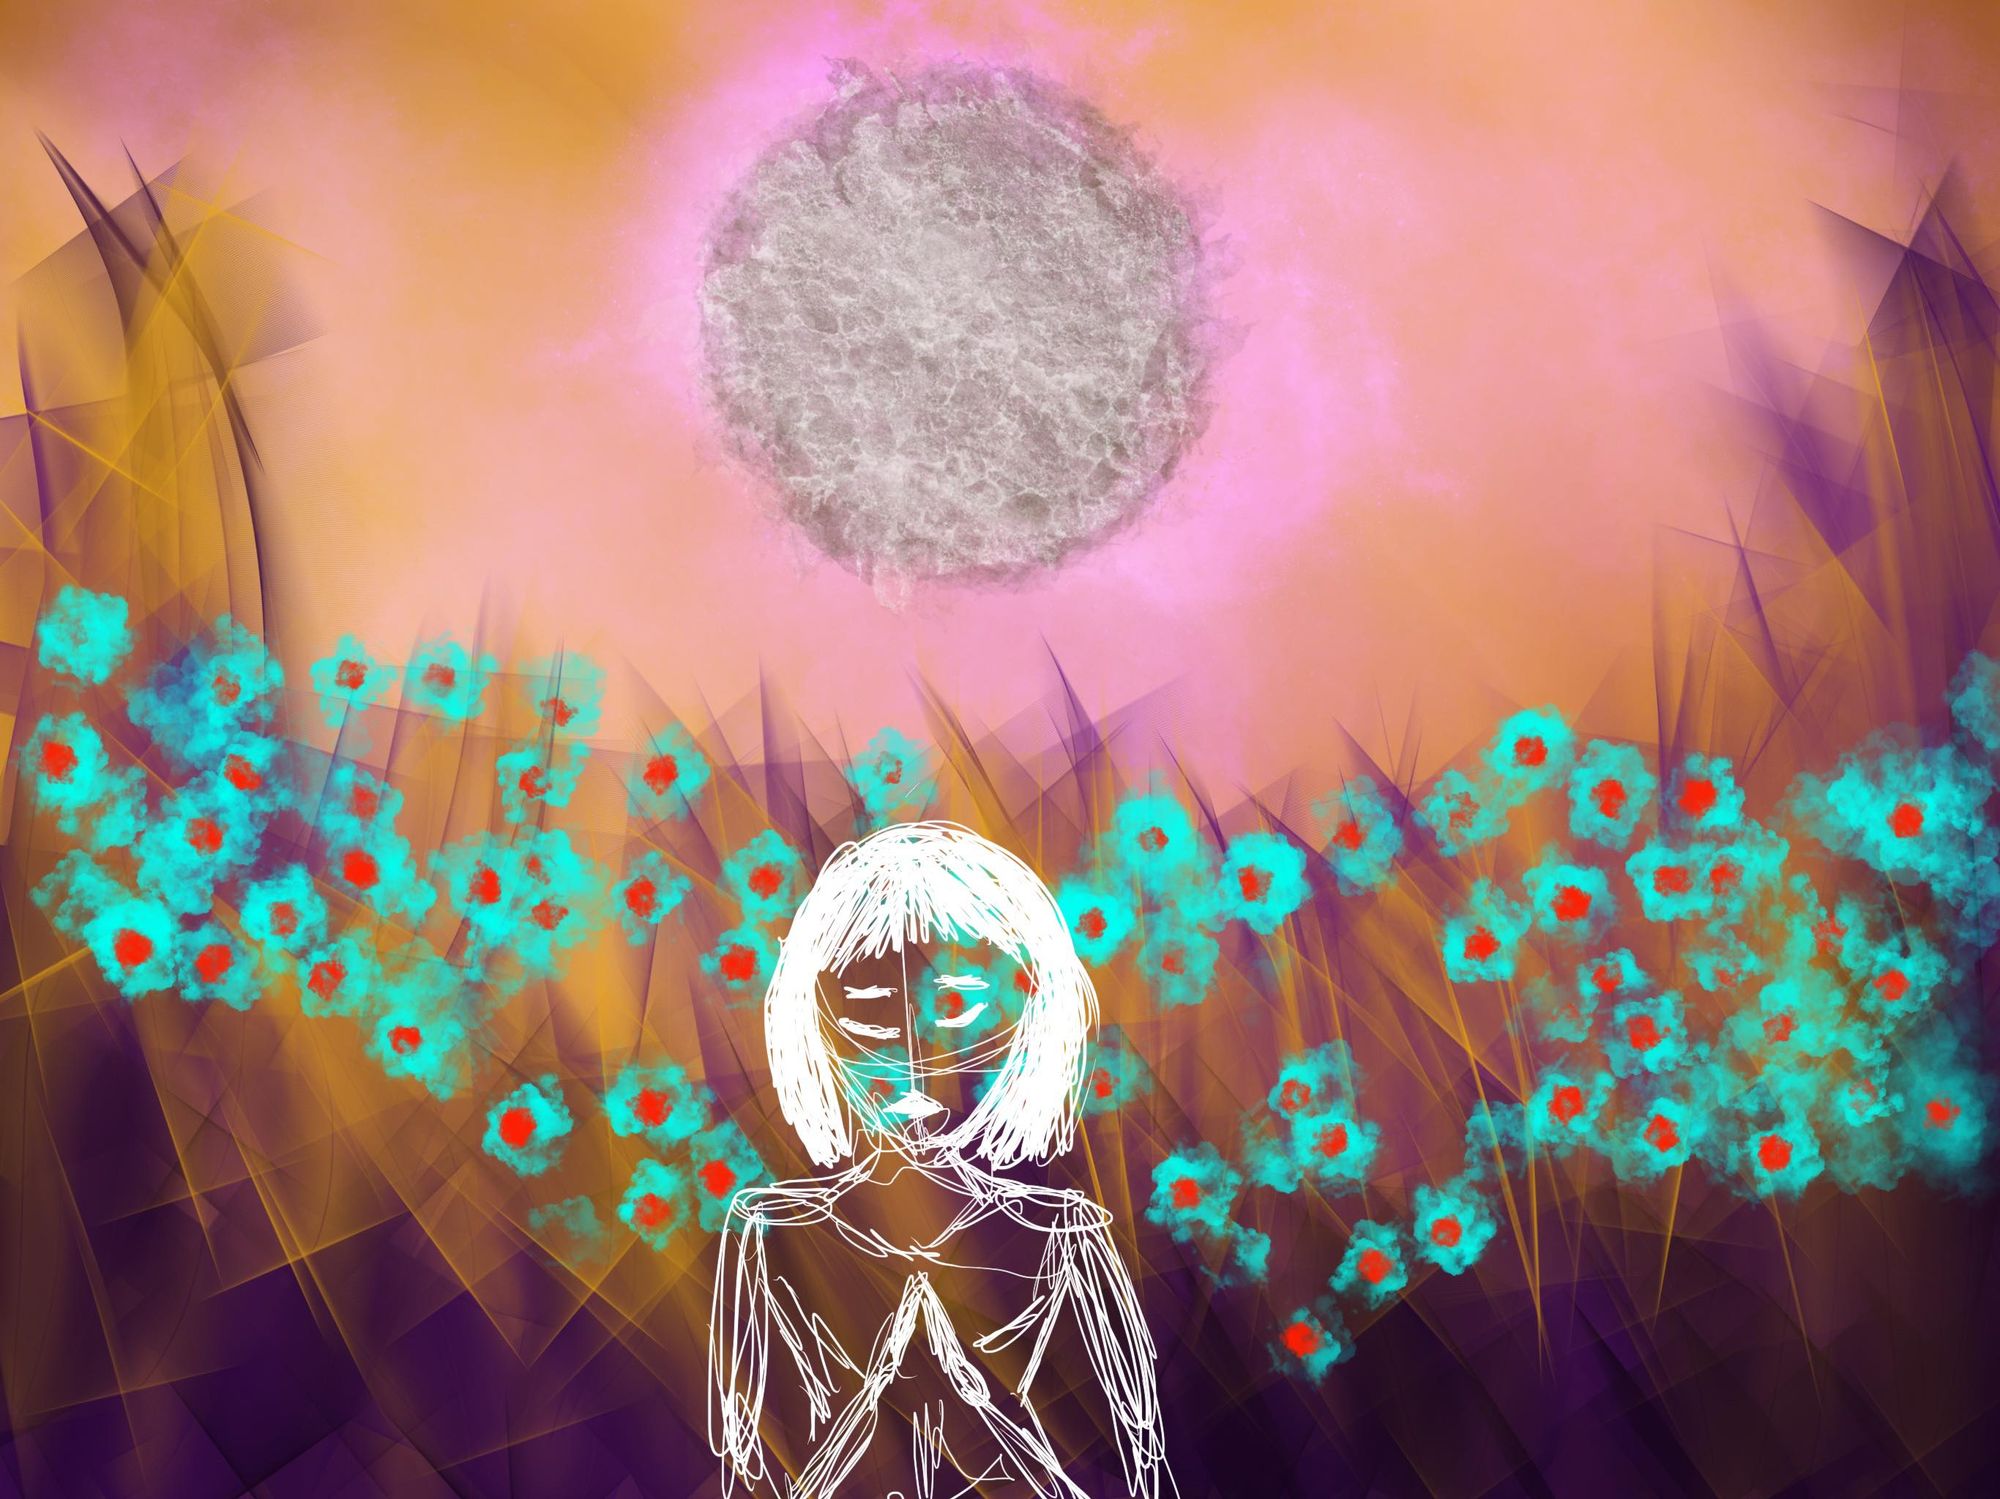 Art with scratchy white figure standing in front of abstract landscape with a spongy moon